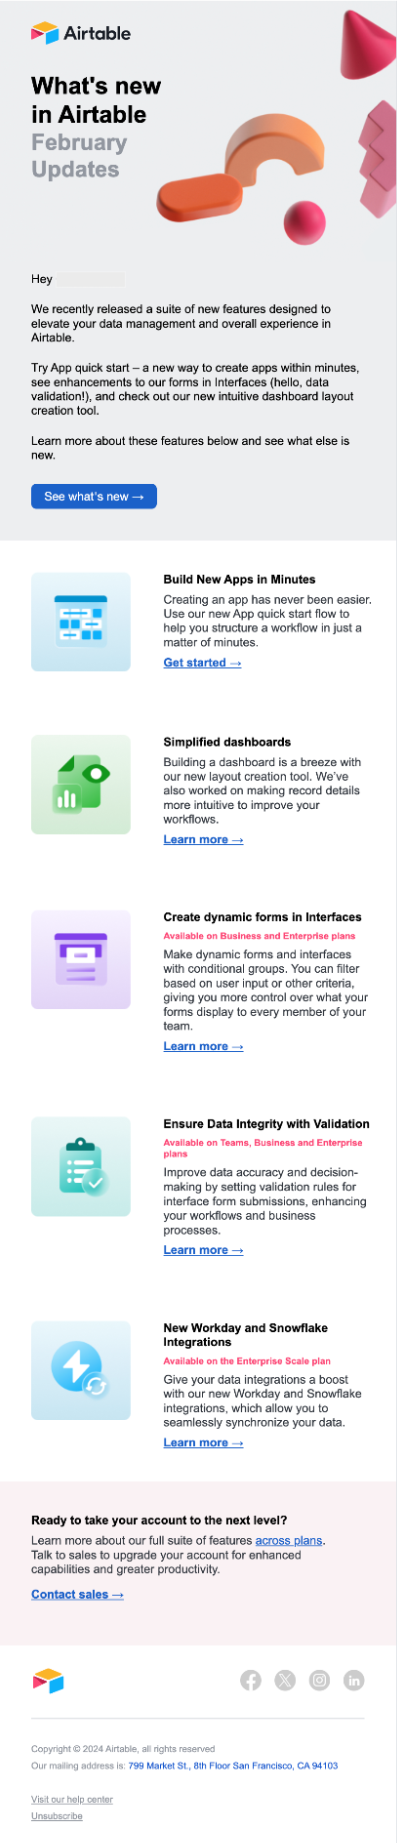 New Feature Announcement Emails: Screenshot of Airtable's new feature roundup email